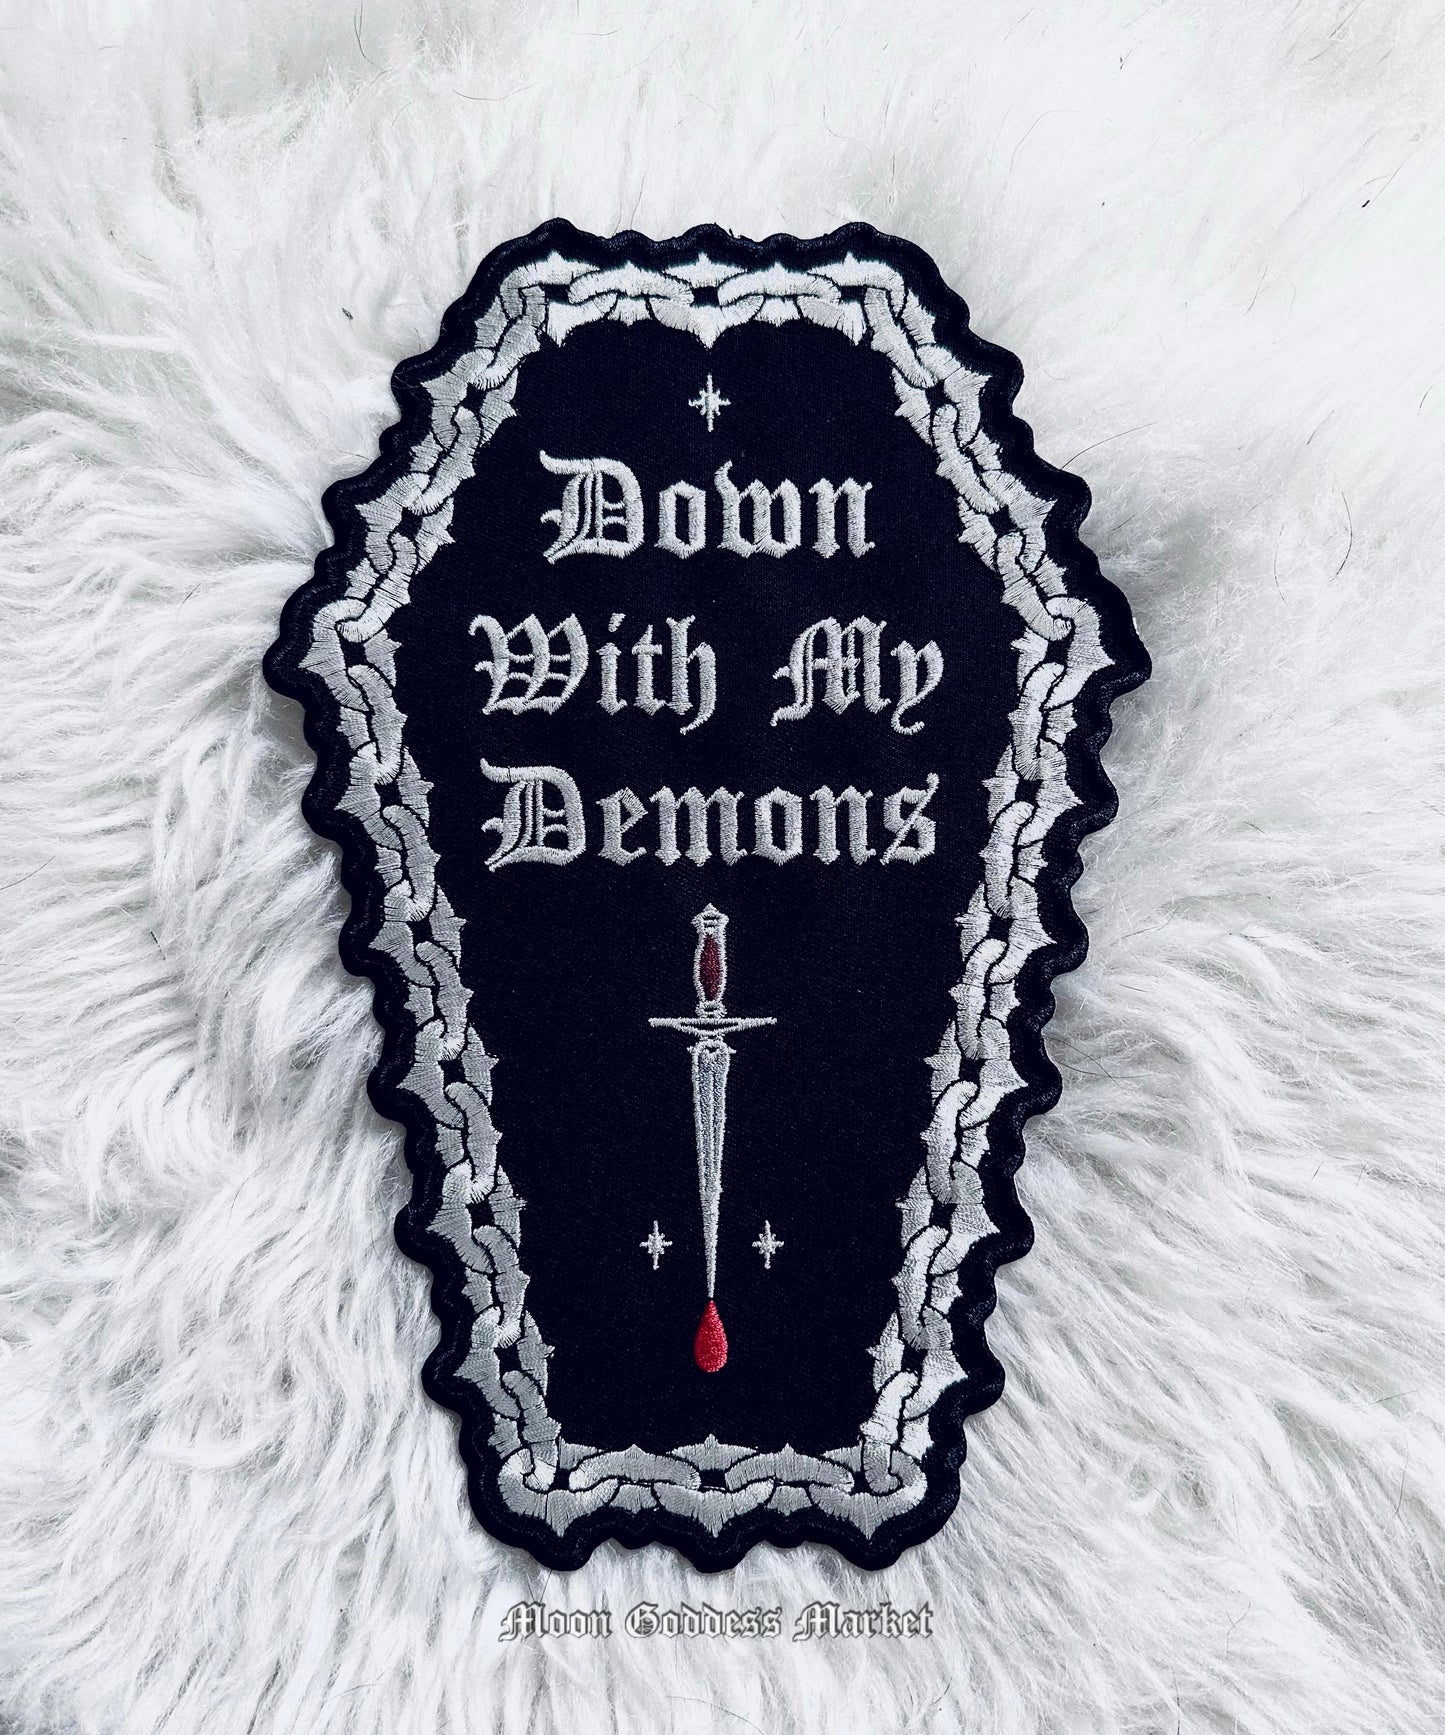 Down With My Demons XL Large Iron On Back Patch - Moon Goddess Market